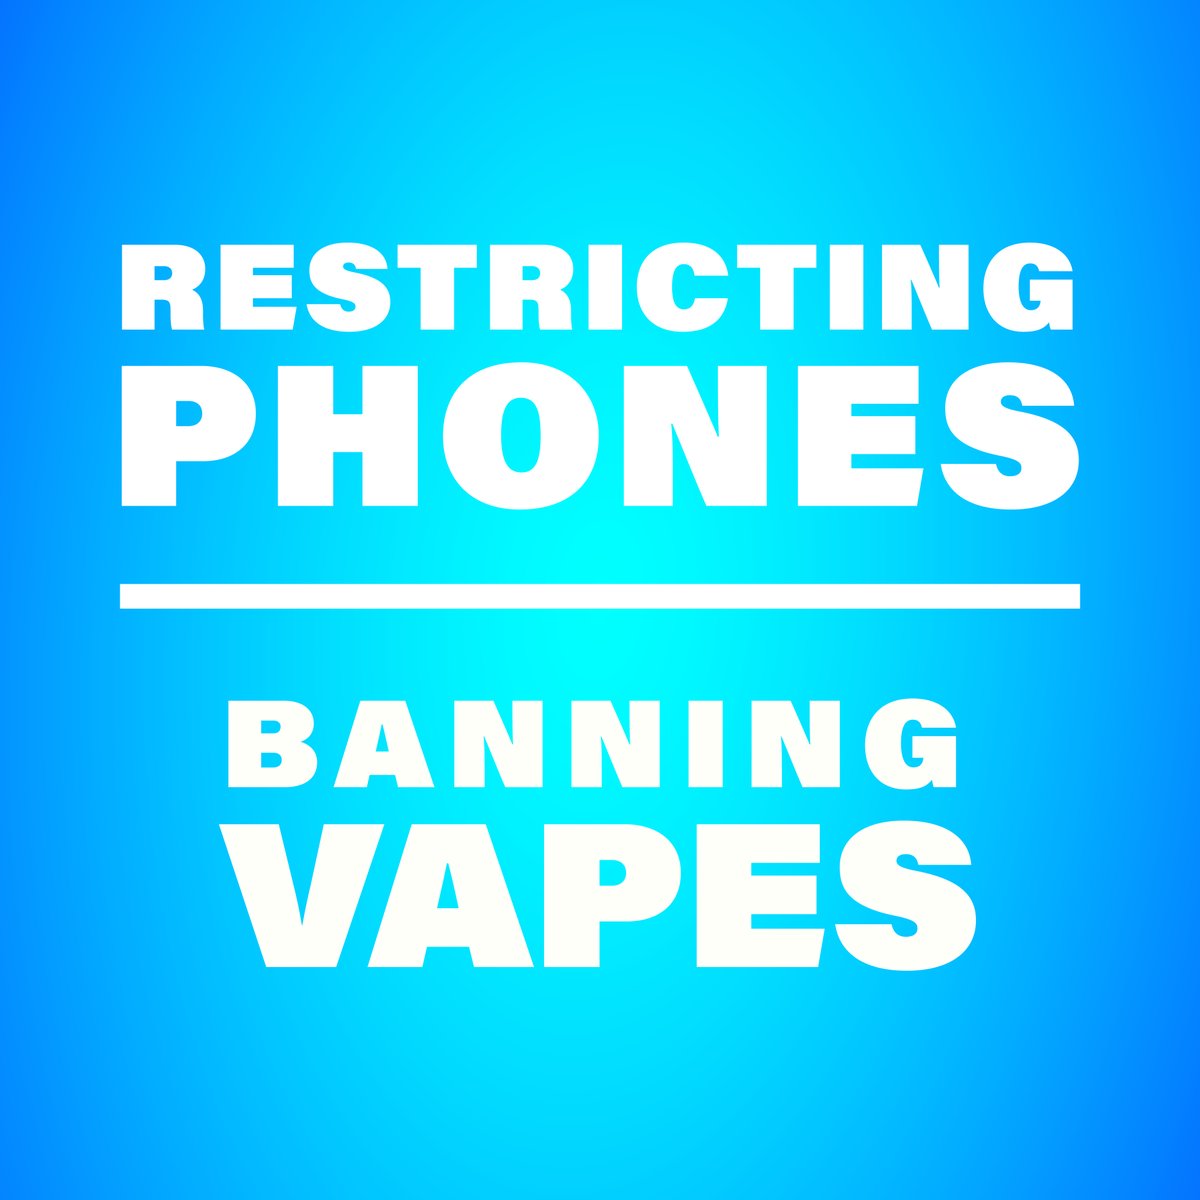 We’re going #BackToBasics in #Durham as we remove distractions from the classroom & restore a healthy, active, and learning-focused school experience for students across #Ontario! news.ontario.ca/en/release/100… @Sflecce #onpoli #vaping #cellphone #students